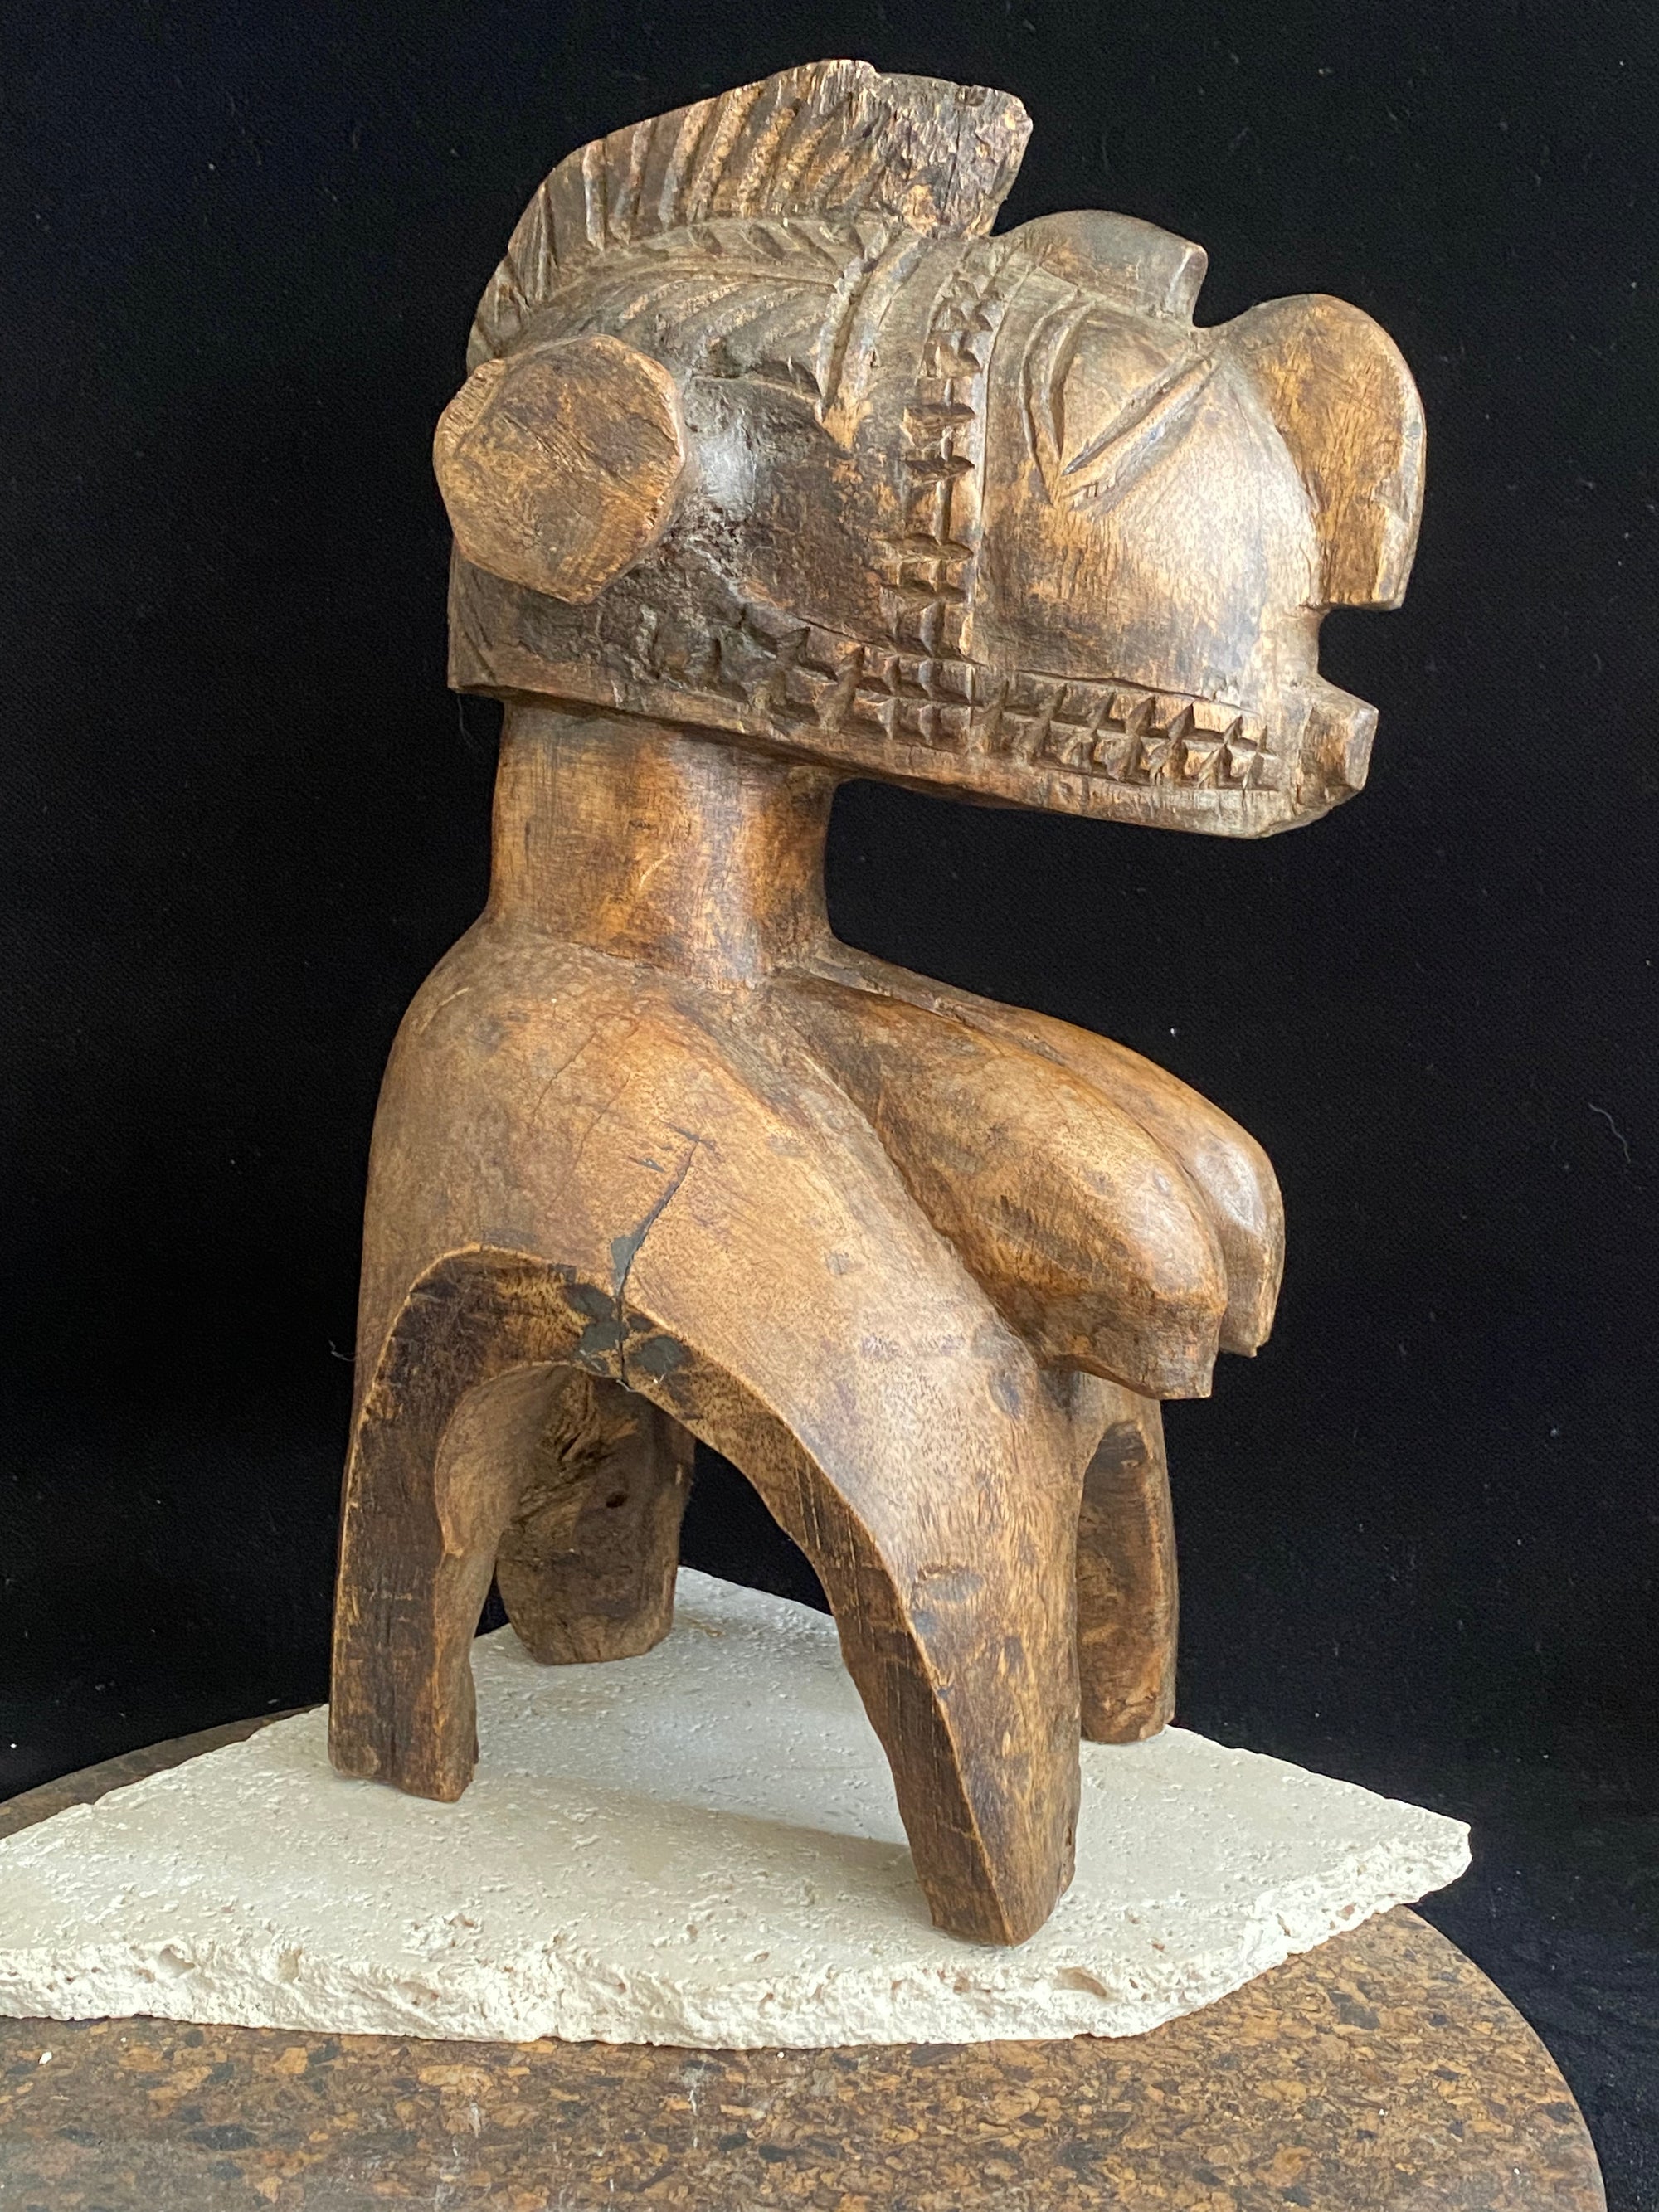 Nimba Mask house statue, Baga people, Guinea, West Africa. Mid 20th century. Carved from wood, this mask has the facial characteristics and long pendulous breasts typical of these figures. Height 31 cm, depth 15 cm, width at widest point 14 cm.